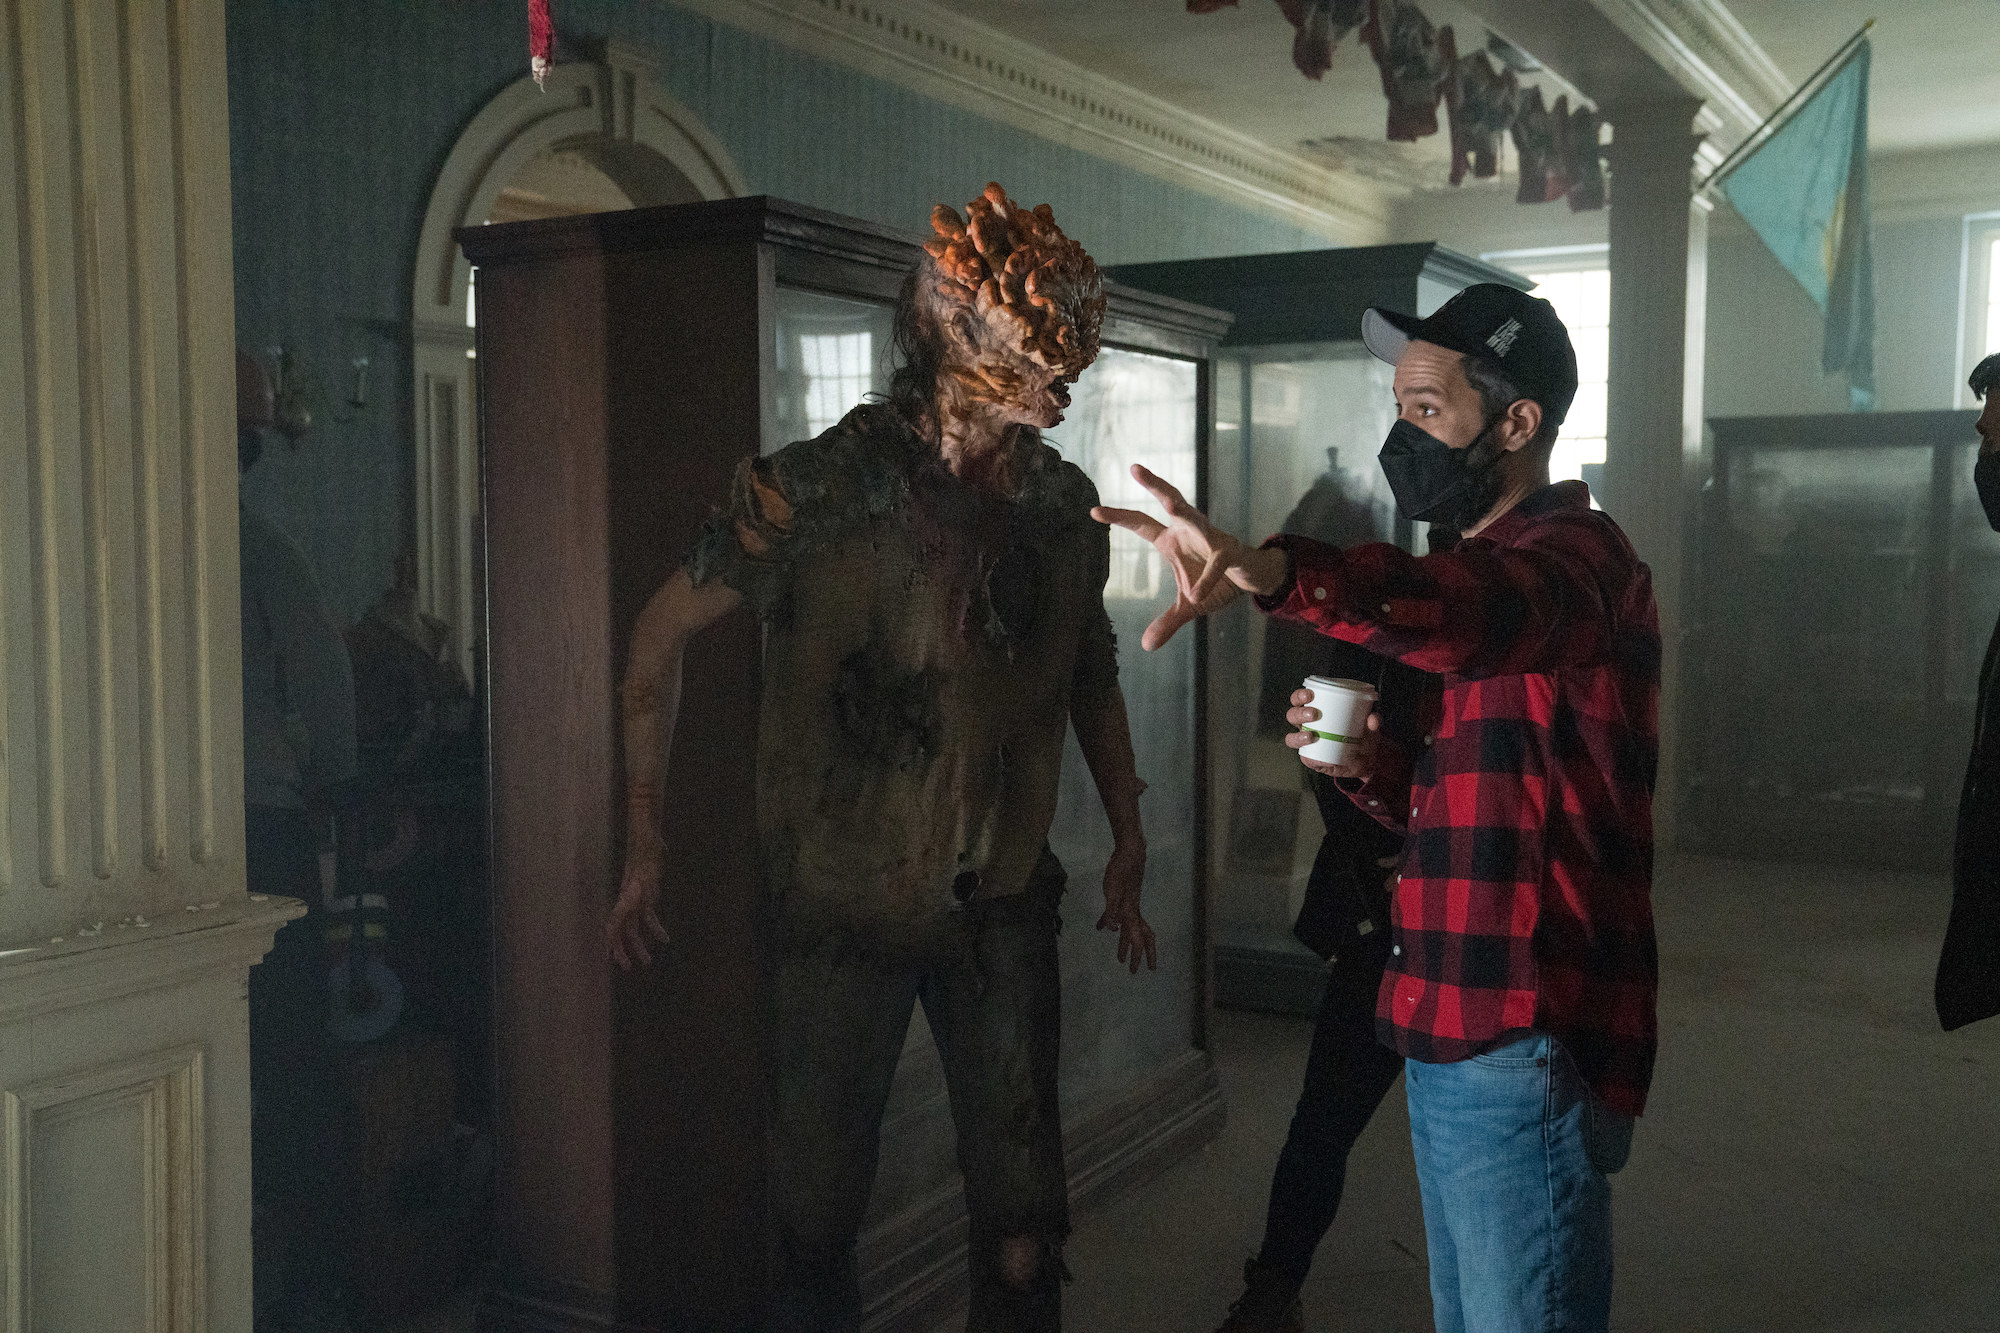 Samuel Hoeksema wears protheics to apear like an infected character in the show as the showrunner instructs him.